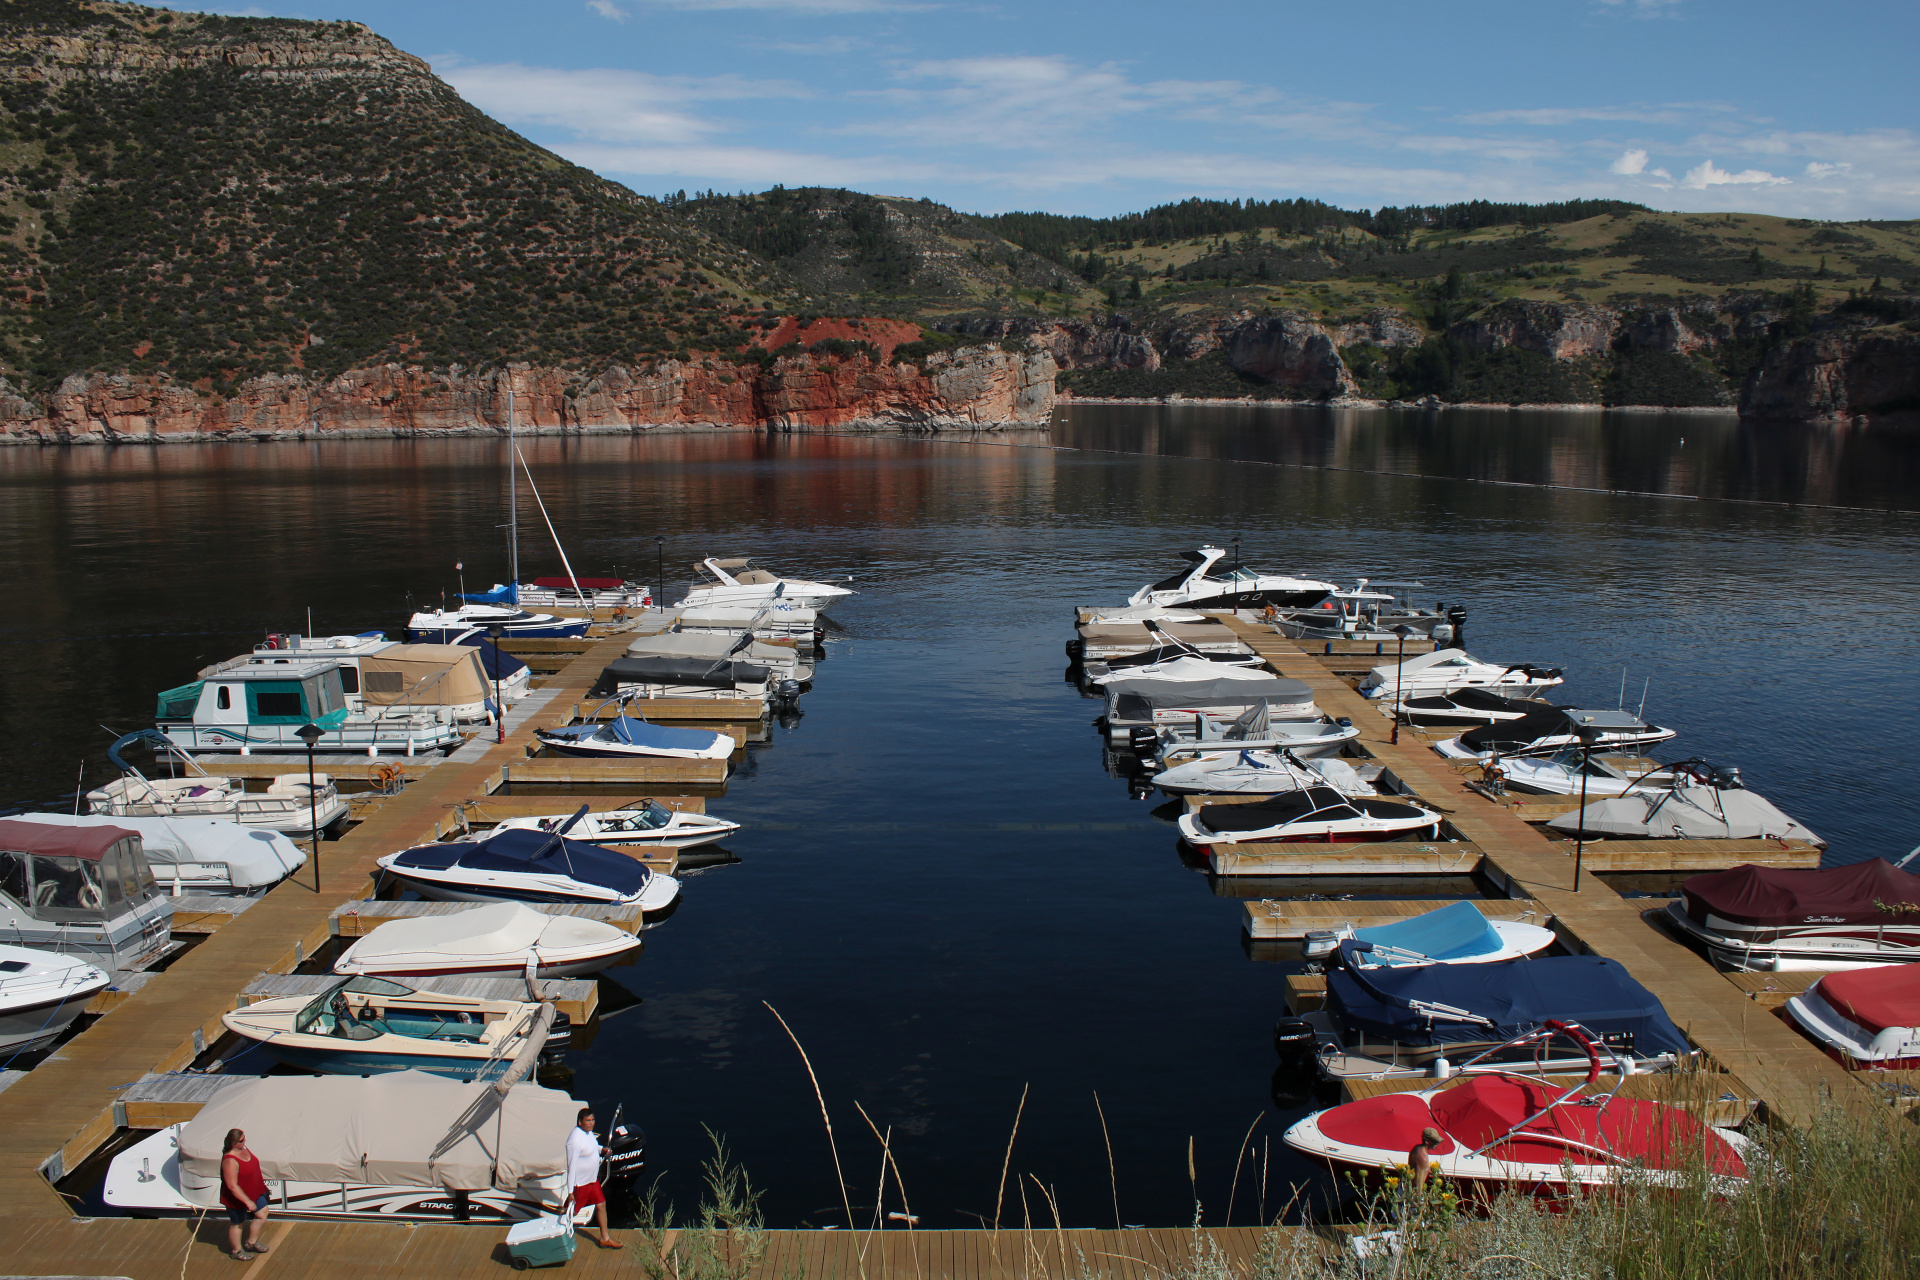 The Haven (Travels » US Trip 3: The Roads Not Taken » The Country » Crow Reservation » Bighorn Canyon Recreation Area)